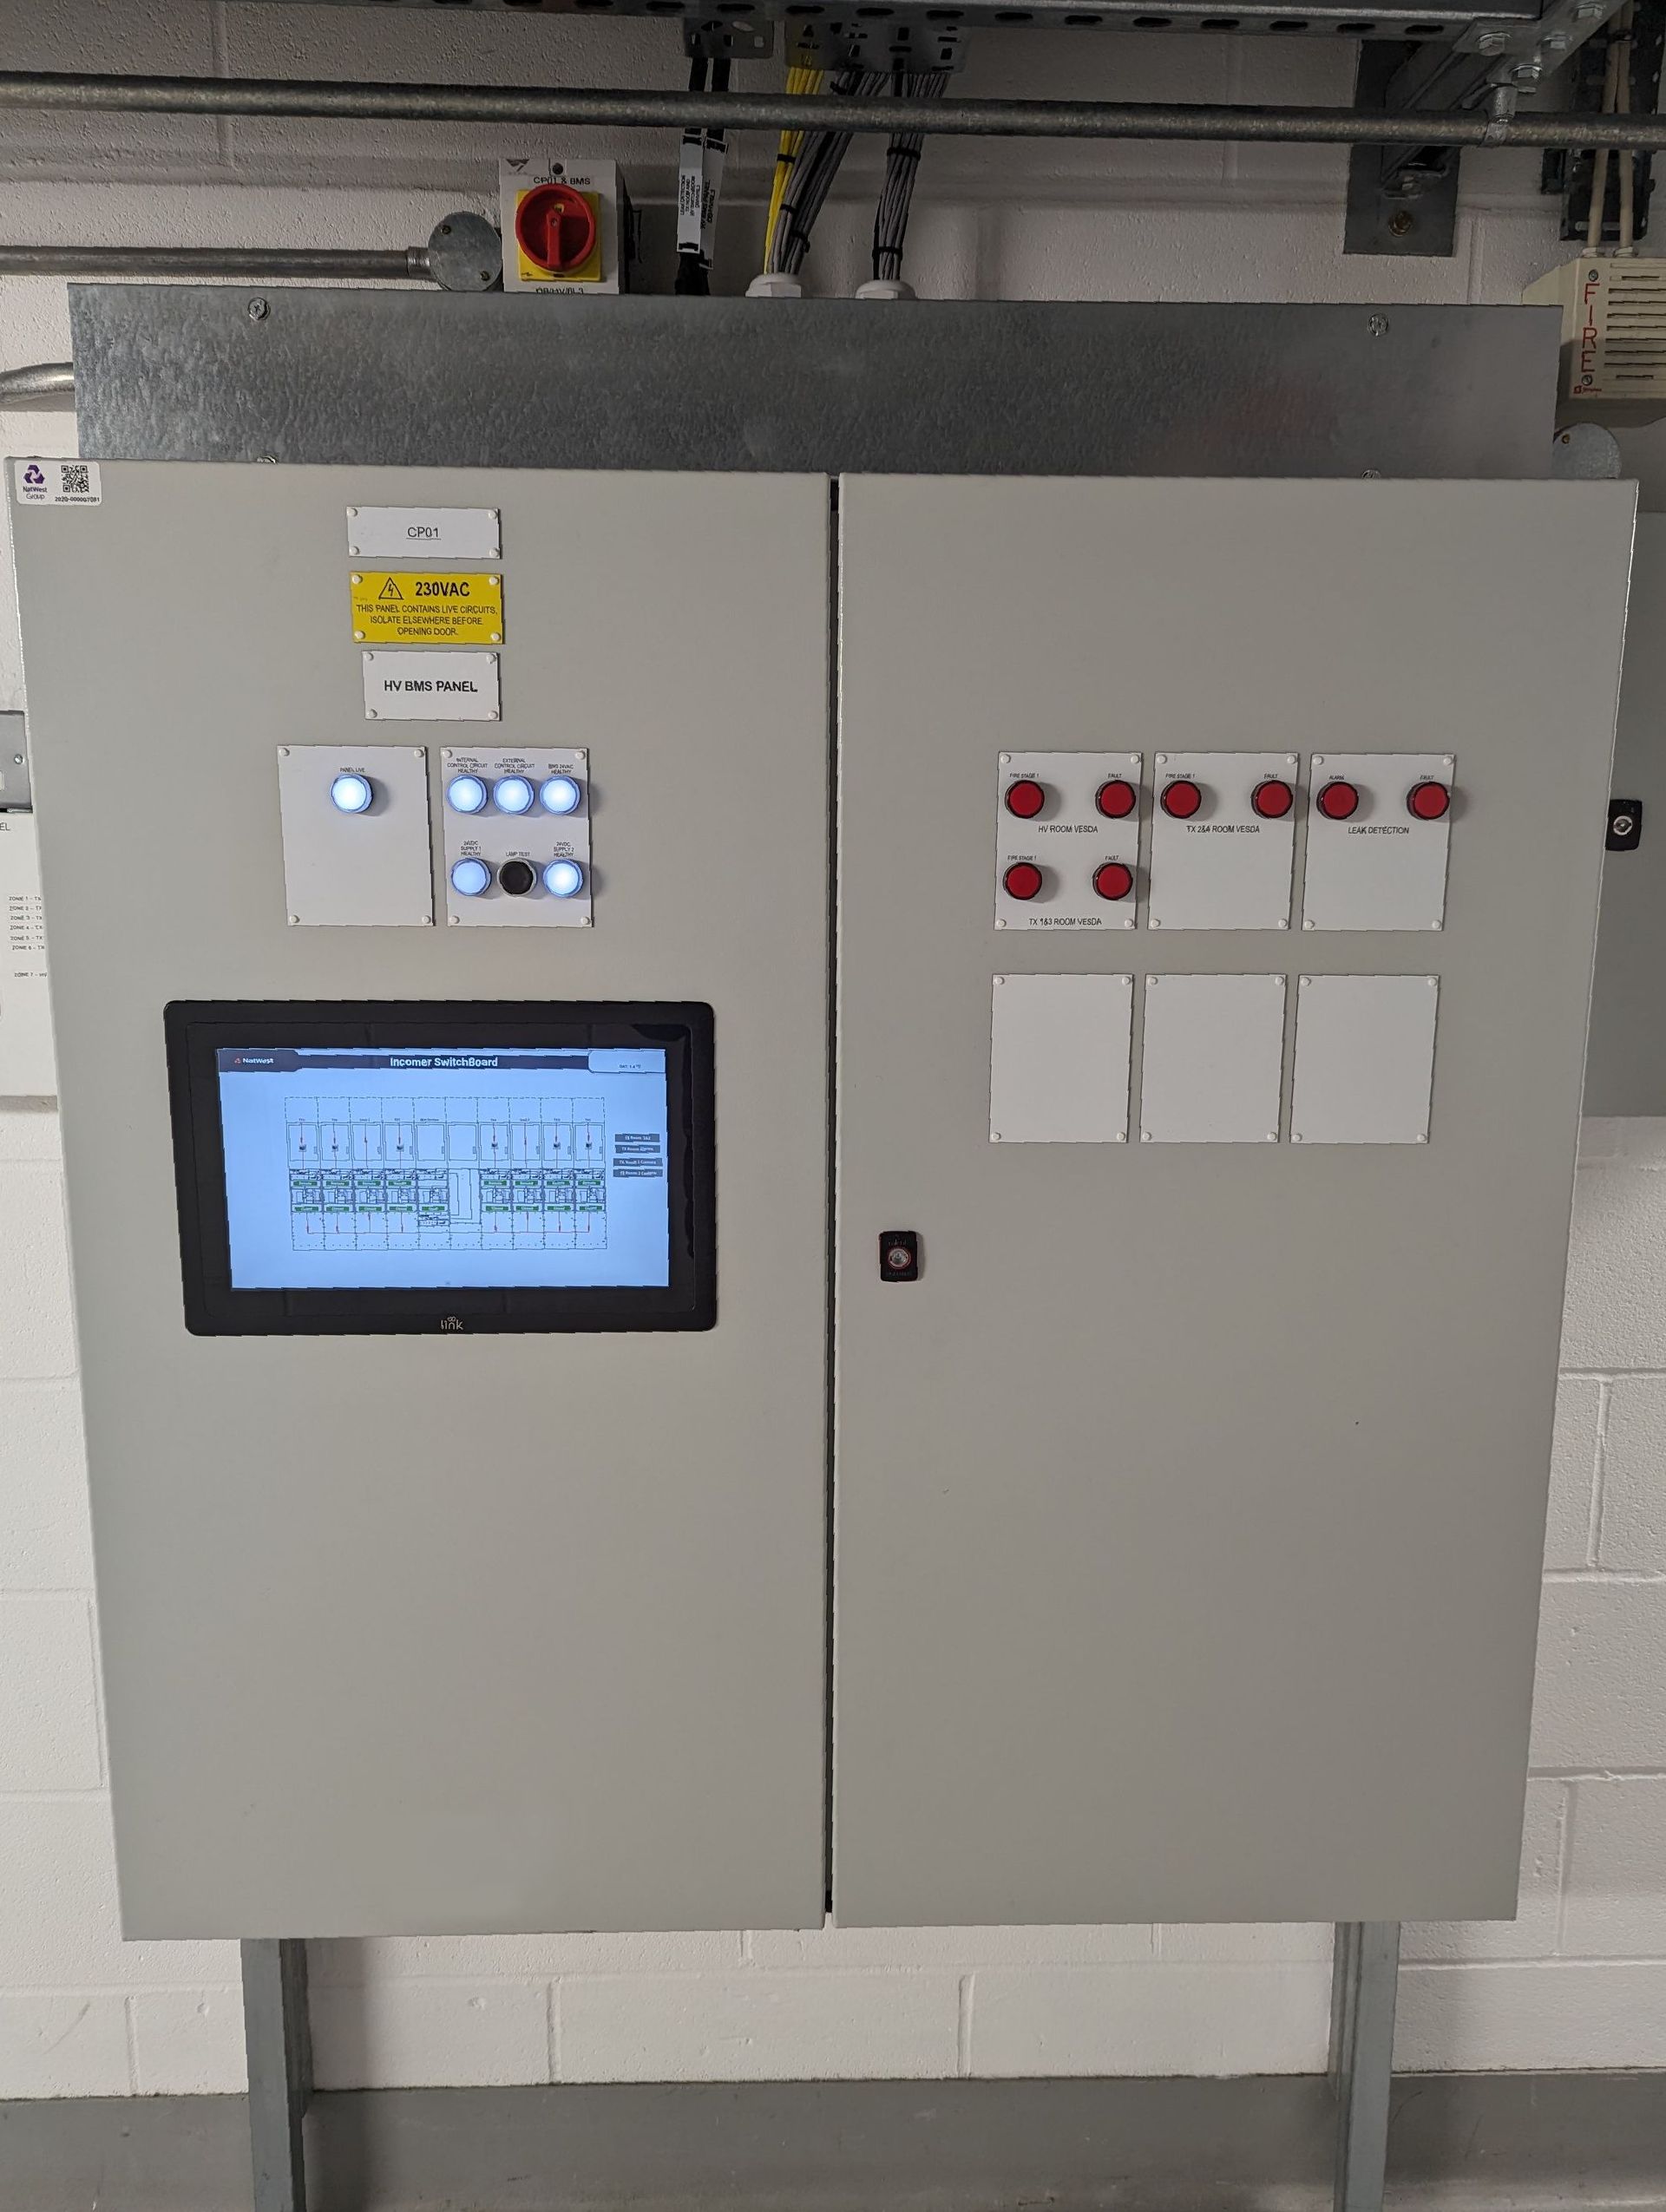 Energy Control Panel in the Basement of a large building with a Smart Display Built-in 